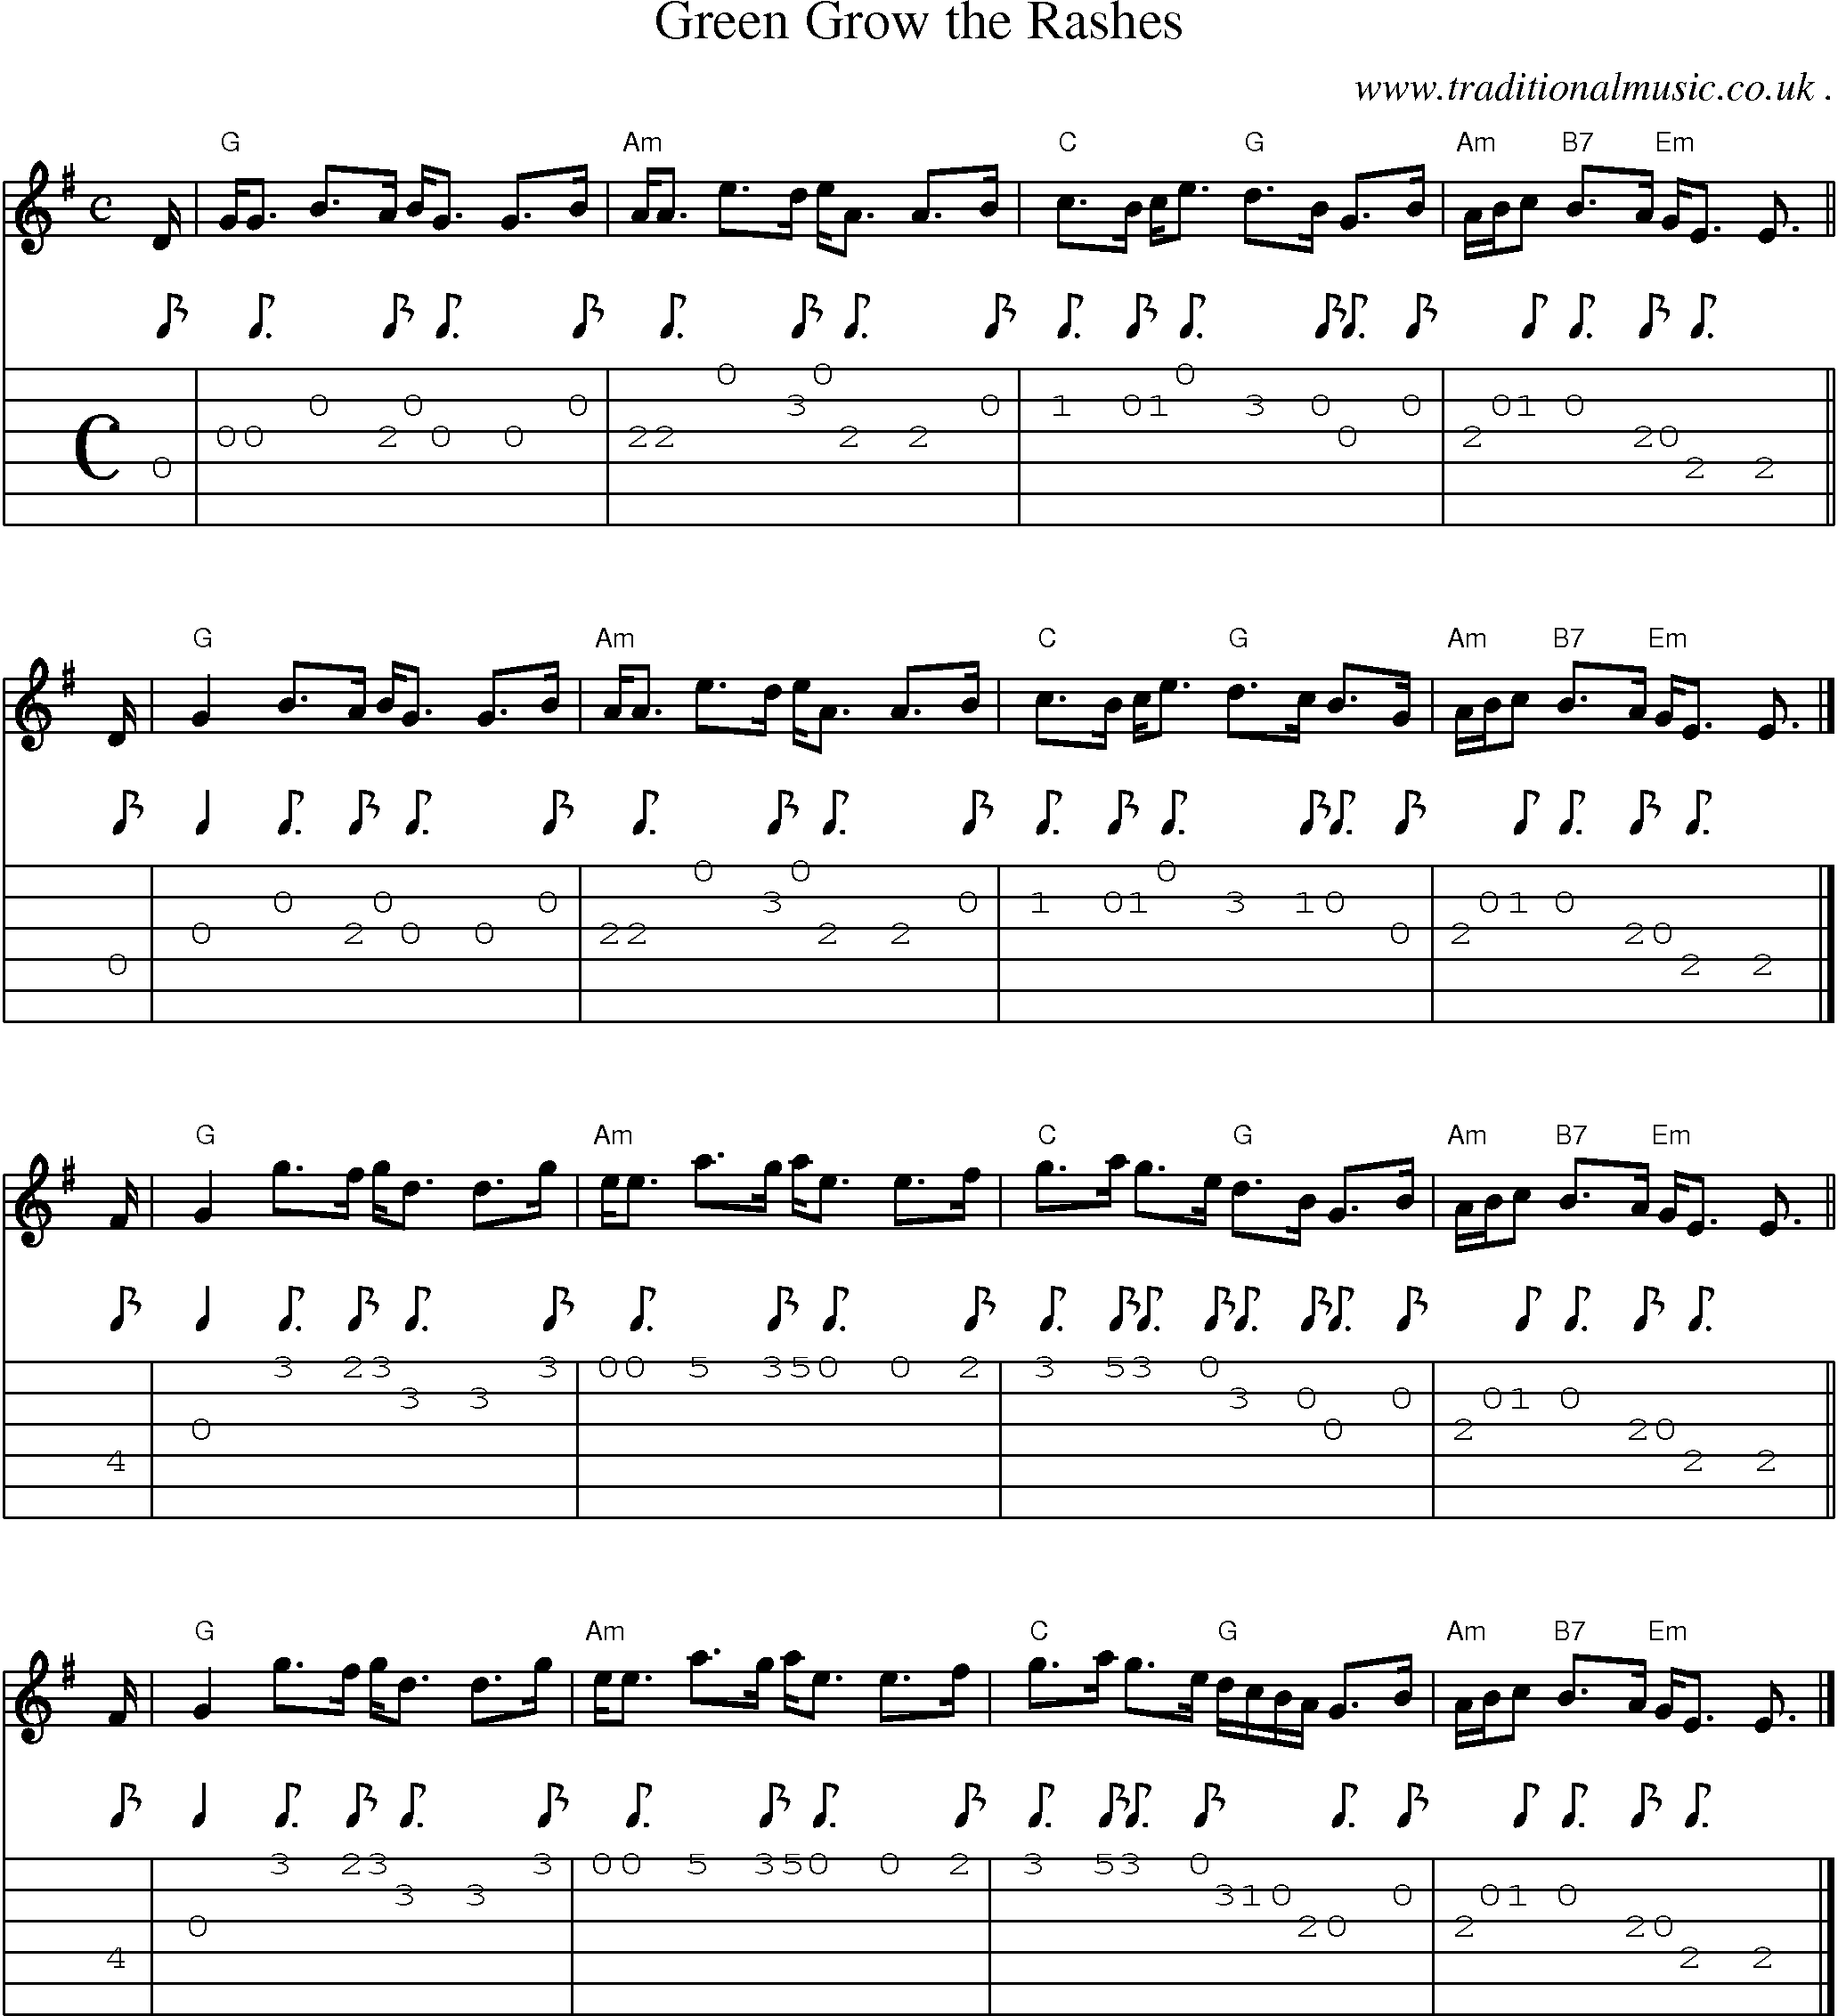 Sheet-music  score, Chords and Guitar Tabs for Green Grow The Rashes